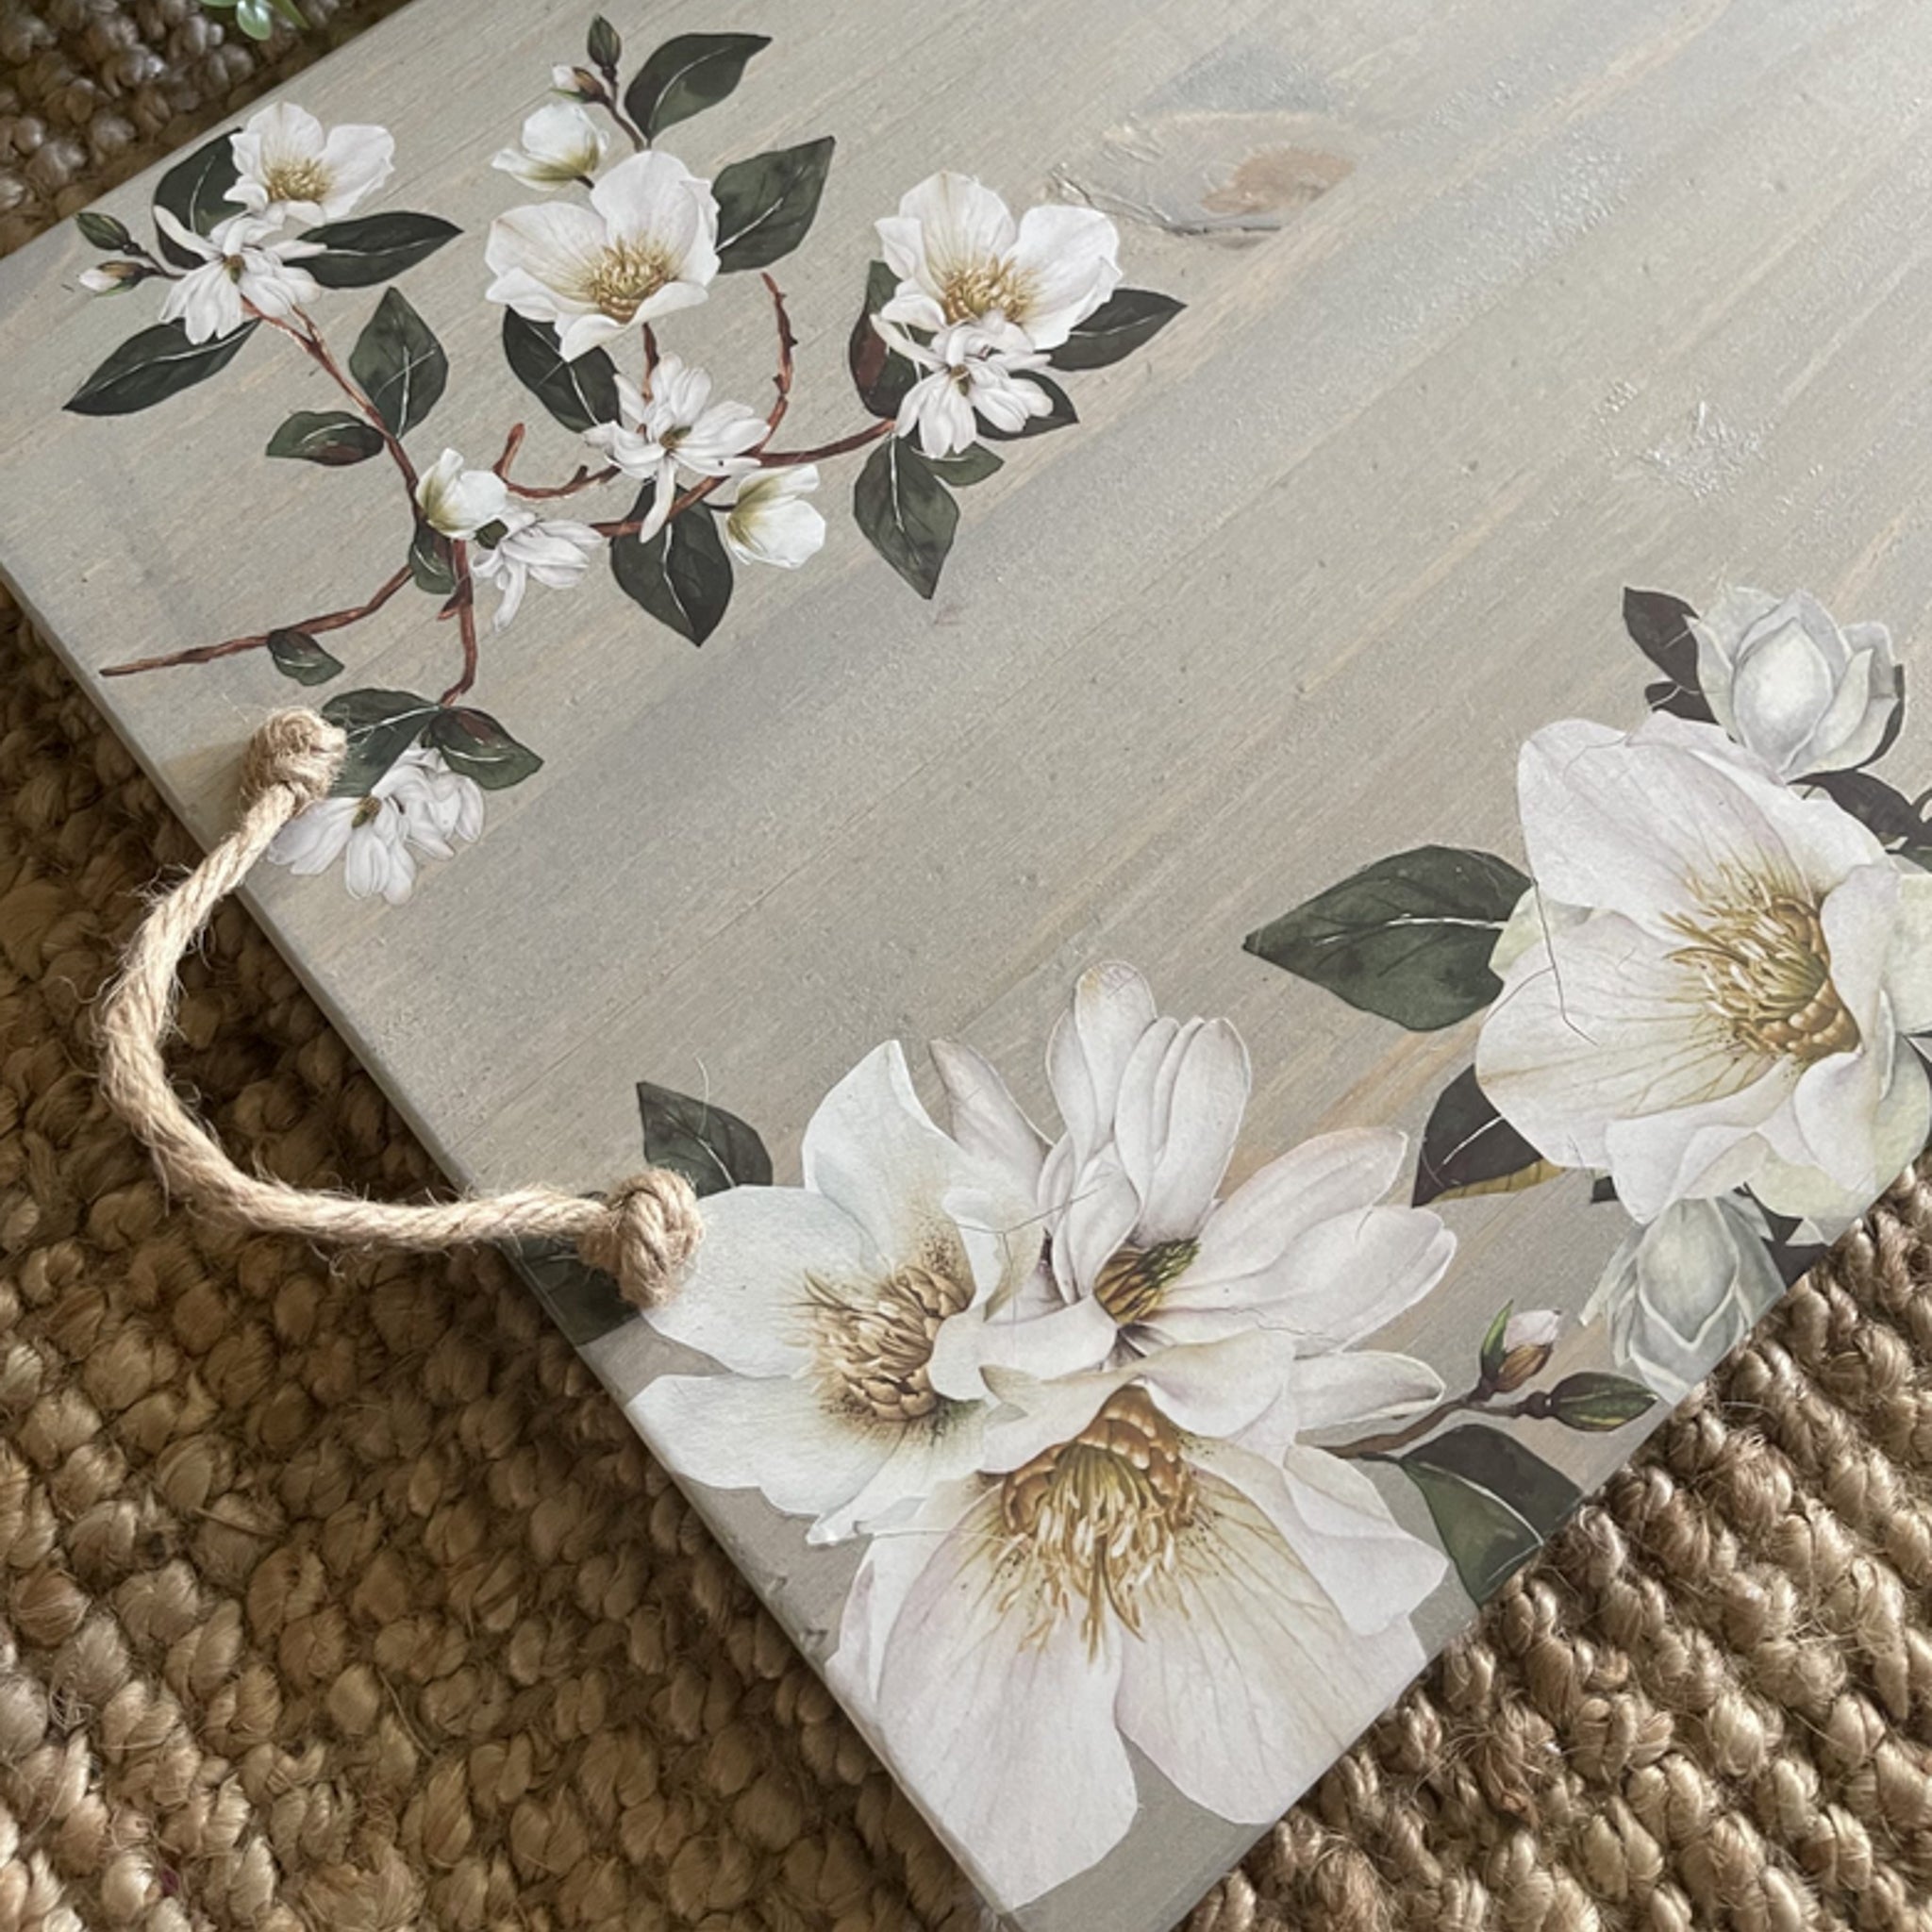 A close-up of a wood serving tray with a rope handle is white-washed and features ReDesign with Prima's White Magnolia small transfer on it.